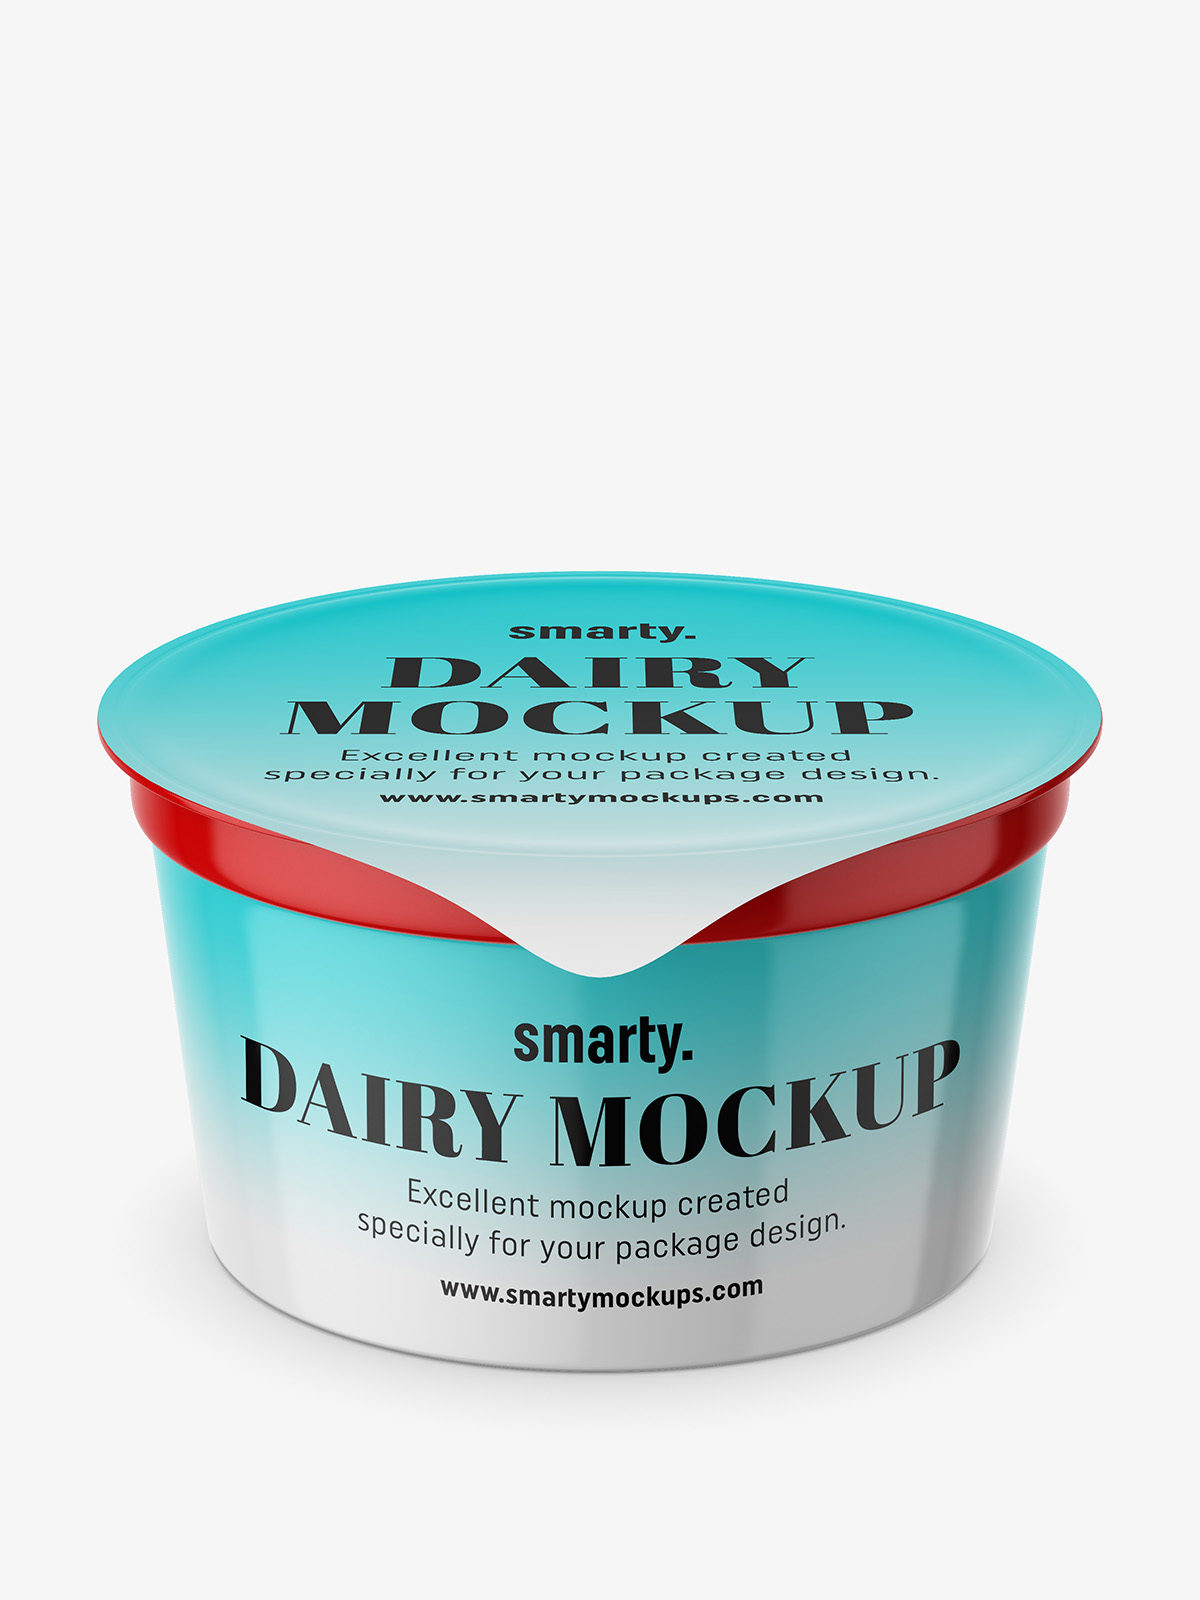 Download Dairy container mockup - Smarty Mockups